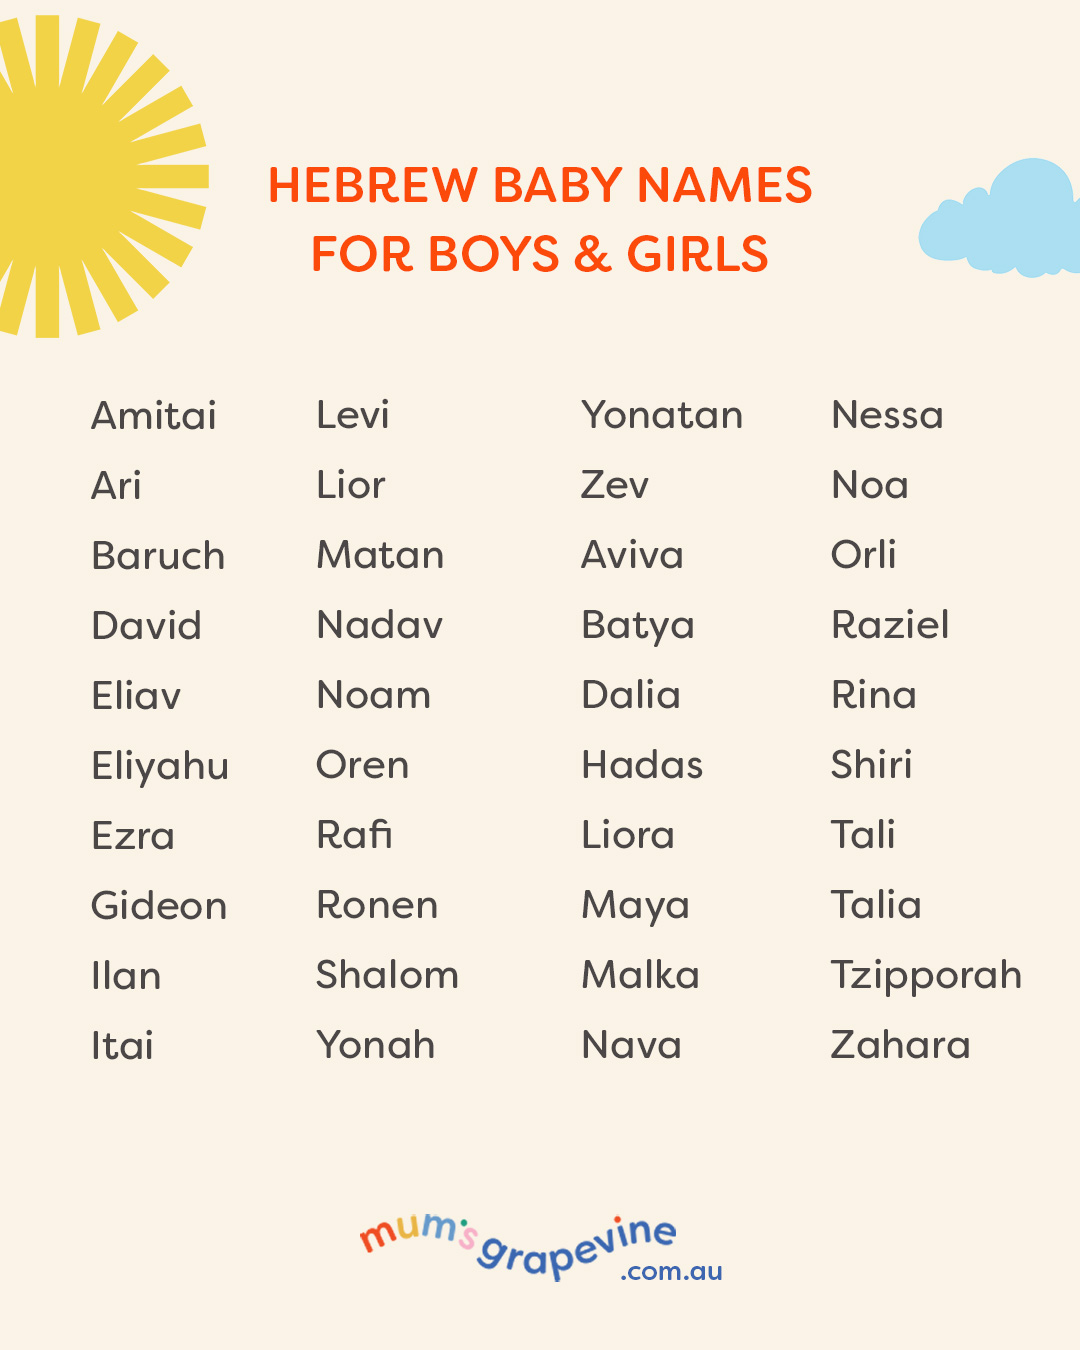 A list of Hebrew baby names for boys and girls